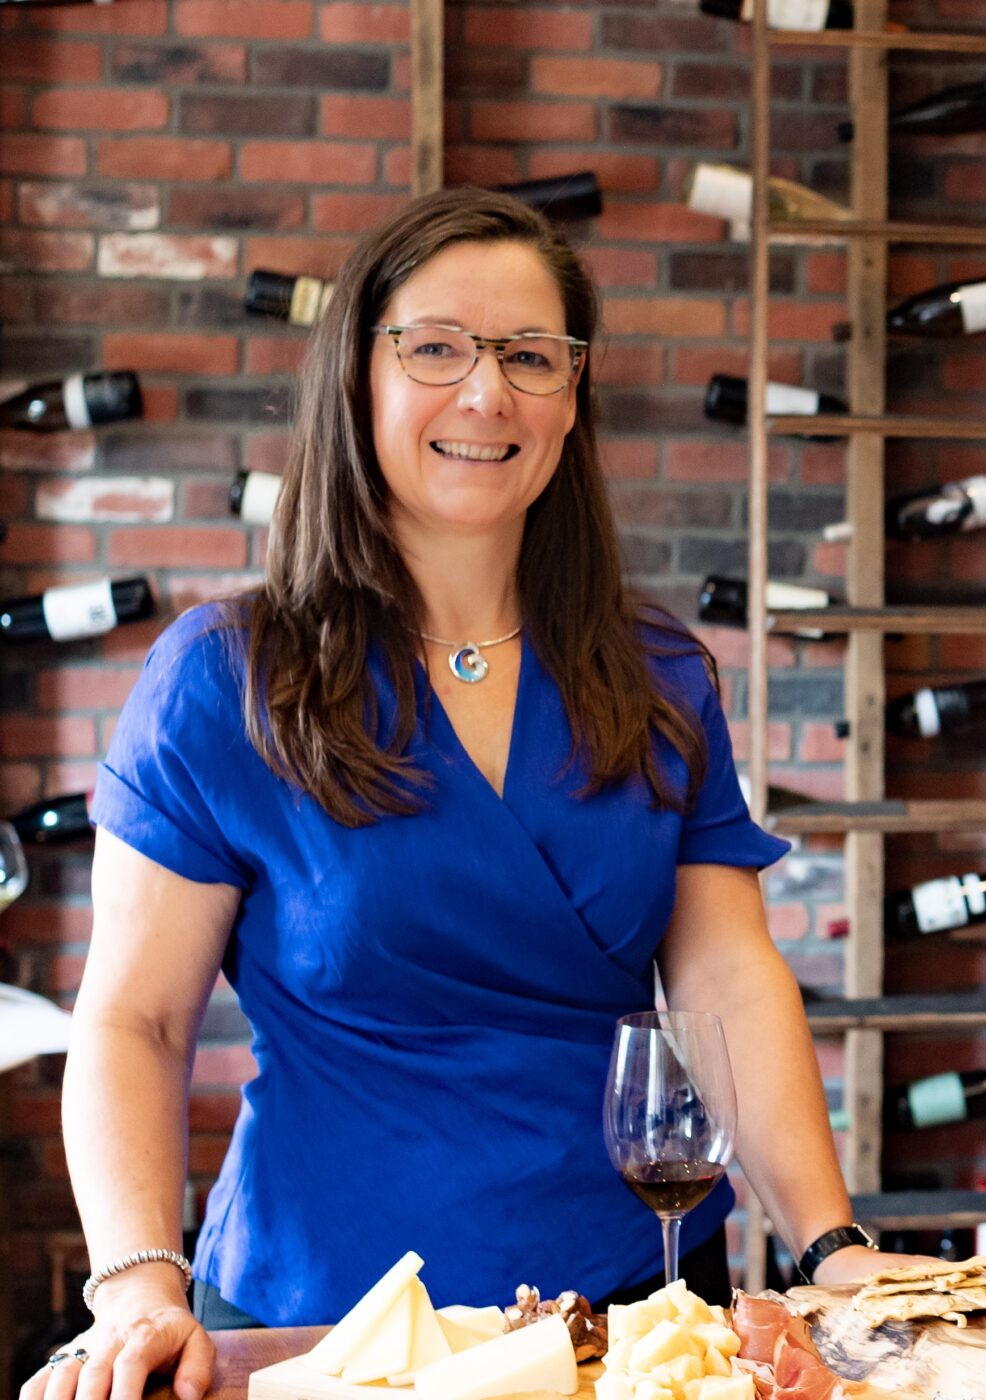 Woman in a blue shirt standing in a room with wine bottles on the wall in the background